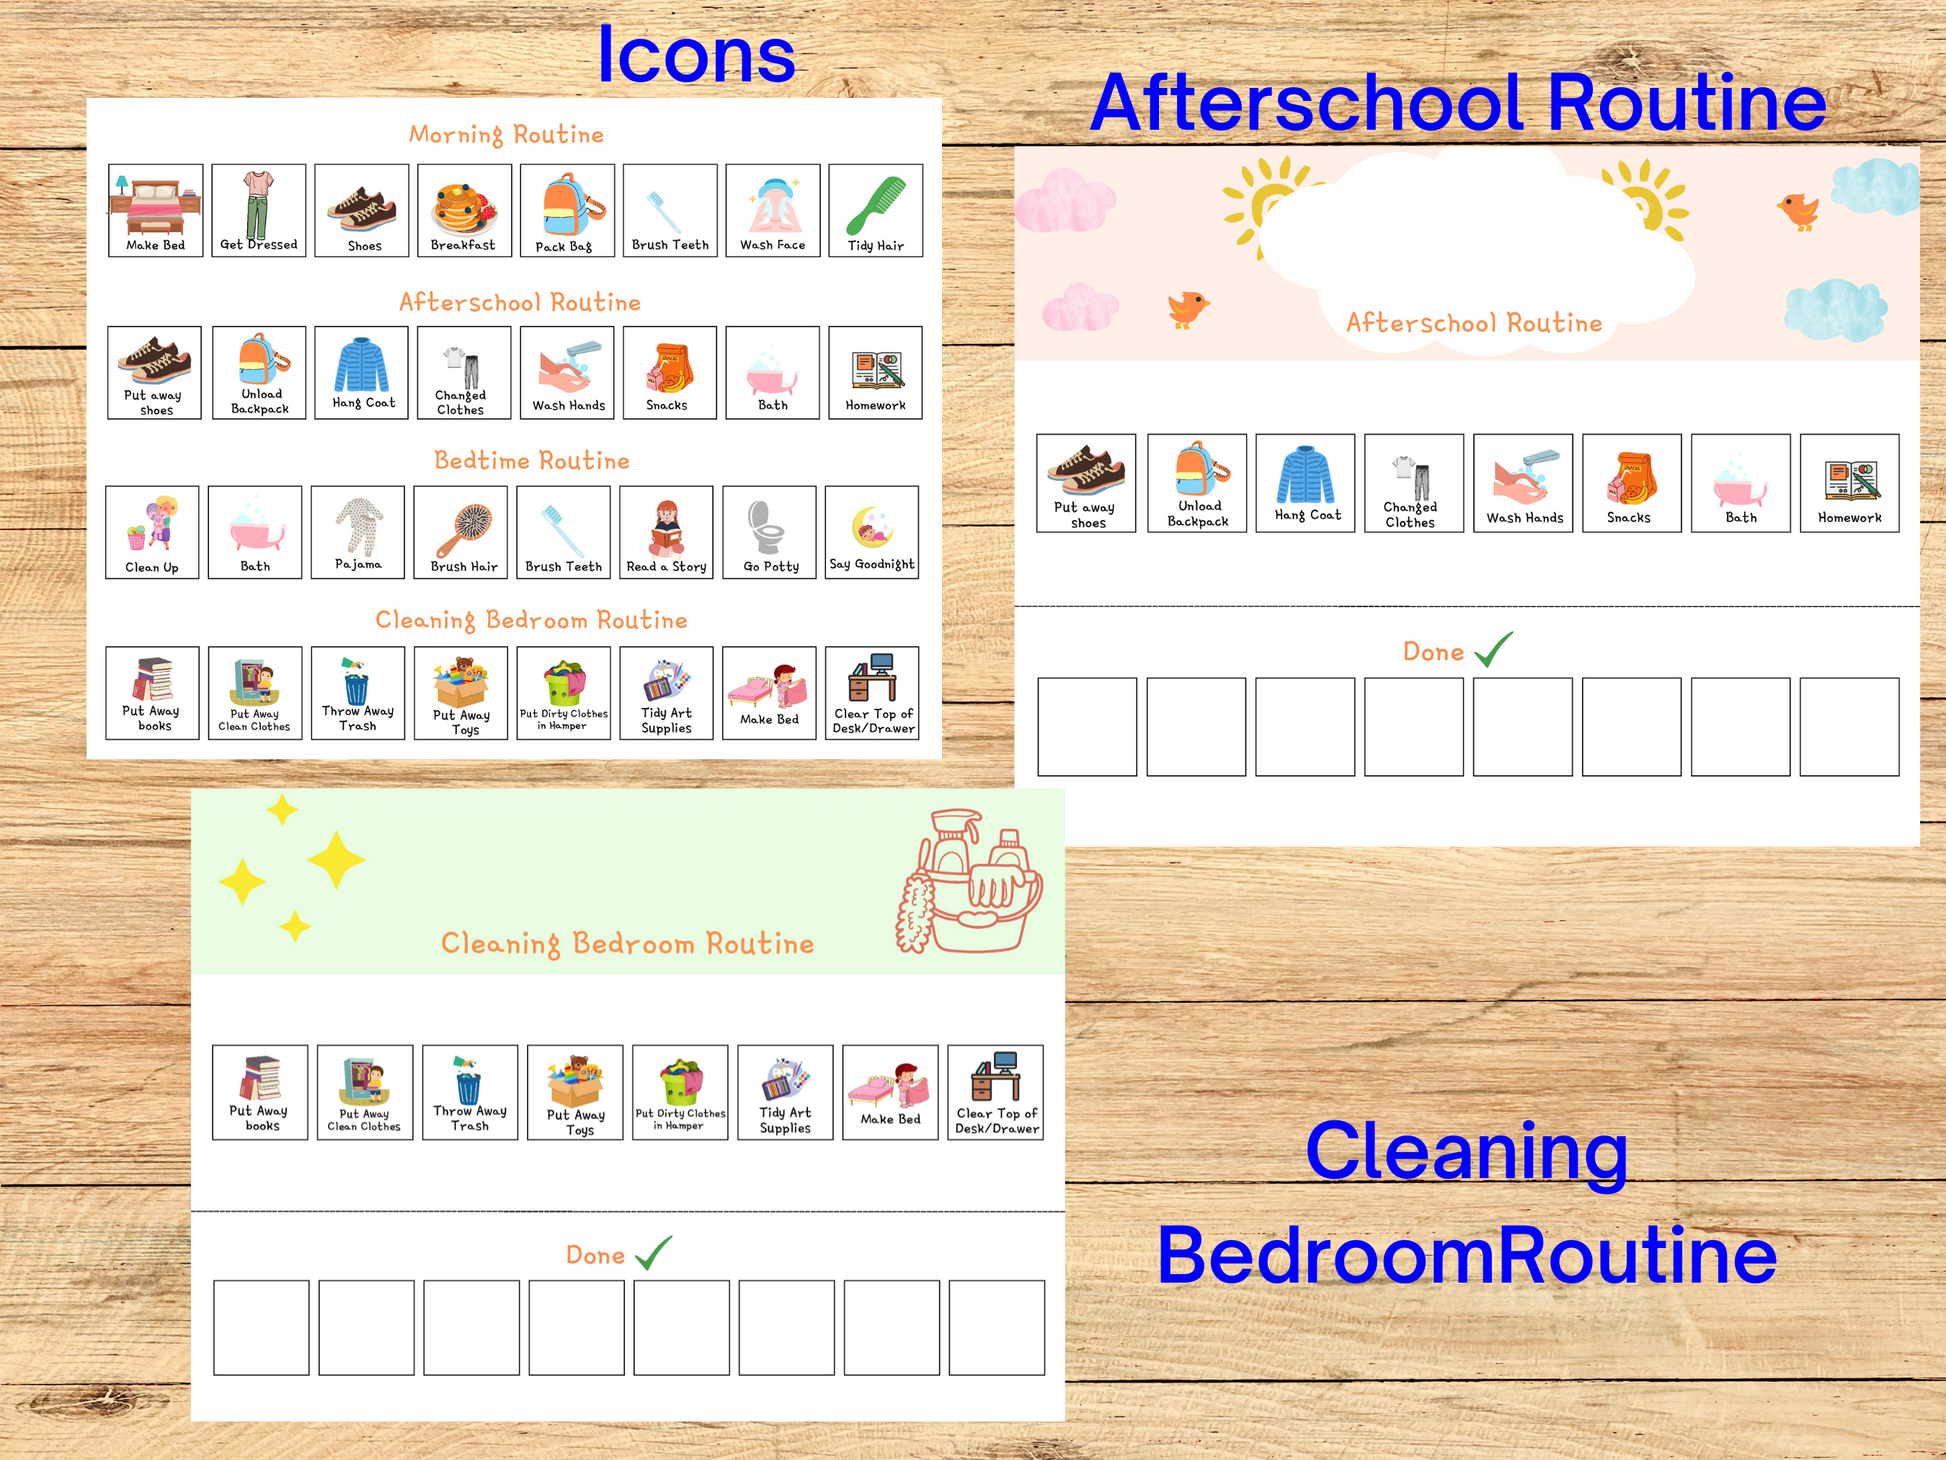 Three photos showing icons, afterschool and cleaning bedtroom charts.